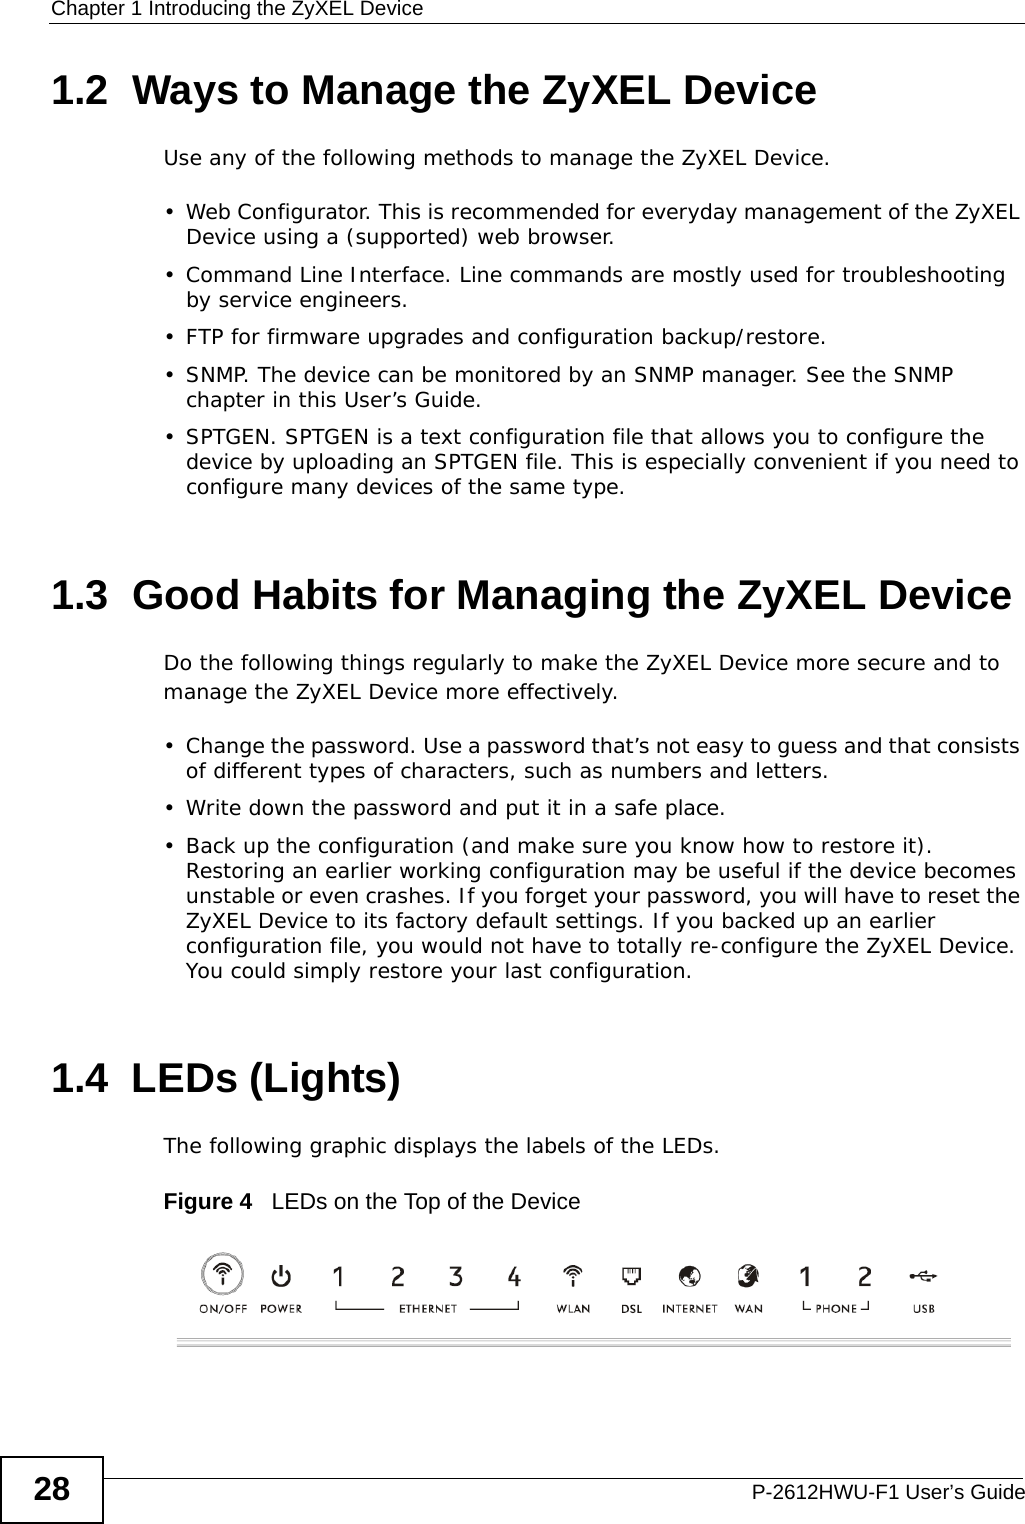 Chapter 1 Introducing the ZyXEL DeviceP-2612HWU-F1 User’s Guide281.2  Ways to Manage the ZyXEL DeviceUse any of the following methods to manage the ZyXEL Device.• Web Configurator. This is recommended for everyday management of the ZyXEL Device using a (supported) web browser.• Command Line Interface. Line commands are mostly used for troubleshooting by service engineers.• FTP for firmware upgrades and configuration backup/restore.• SNMP. The device can be monitored by an SNMP manager. See the SNMP chapter in this User’s Guide.• SPTGEN. SPTGEN is a text configuration file that allows you to configure the device by uploading an SPTGEN file. This is especially convenient if you need to configure many devices of the same type. 1.3  Good Habits for Managing the ZyXEL DeviceDo the following things regularly to make the ZyXEL Device more secure and to manage the ZyXEL Device more effectively.• Change the password. Use a password that’s not easy to guess and that consists of different types of characters, such as numbers and letters.• Write down the password and put it in a safe place.• Back up the configuration (and make sure you know how to restore it). Restoring an earlier working configuration may be useful if the device becomes unstable or even crashes. If you forget your password, you will have to reset the ZyXEL Device to its factory default settings. If you backed up an earlier configuration file, you would not have to totally re-configure the ZyXEL Device. You could simply restore your last configuration.1.4  LEDs (Lights)The following graphic displays the labels of the LEDs.Figure 4   LEDs on the Top of the Device